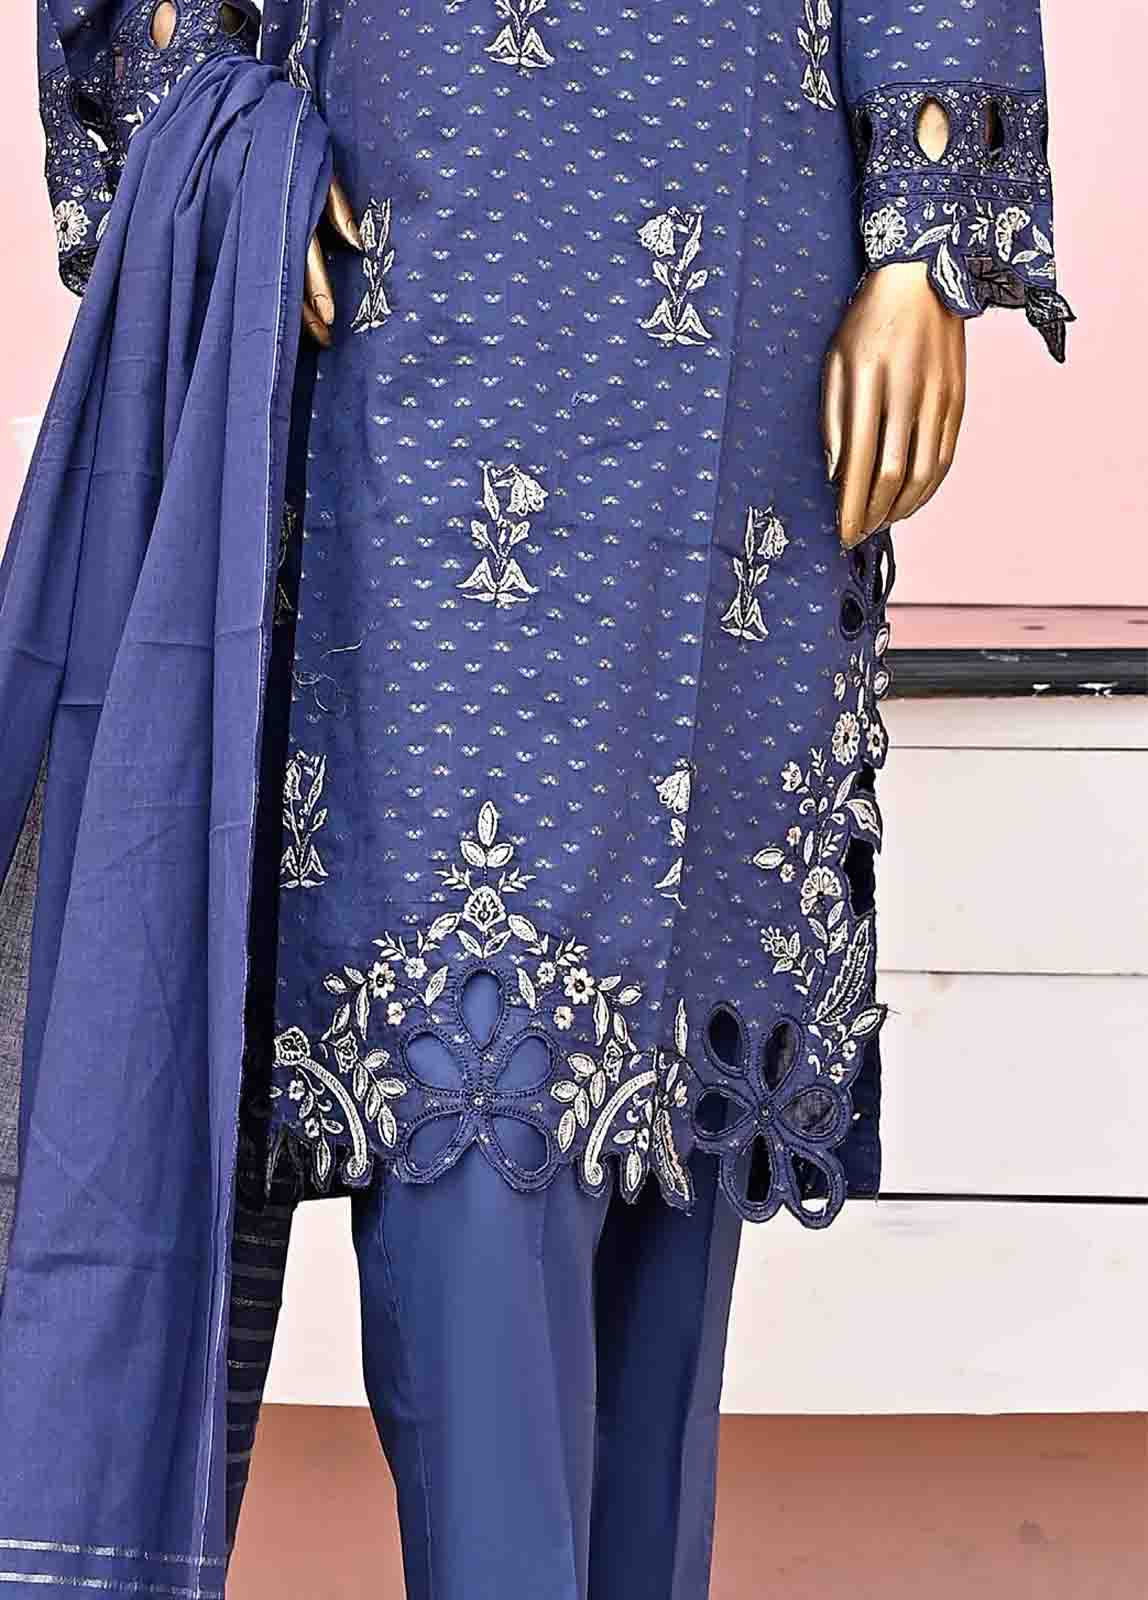 BNSE-016- 3 Piece Jacquard Embroidered collection